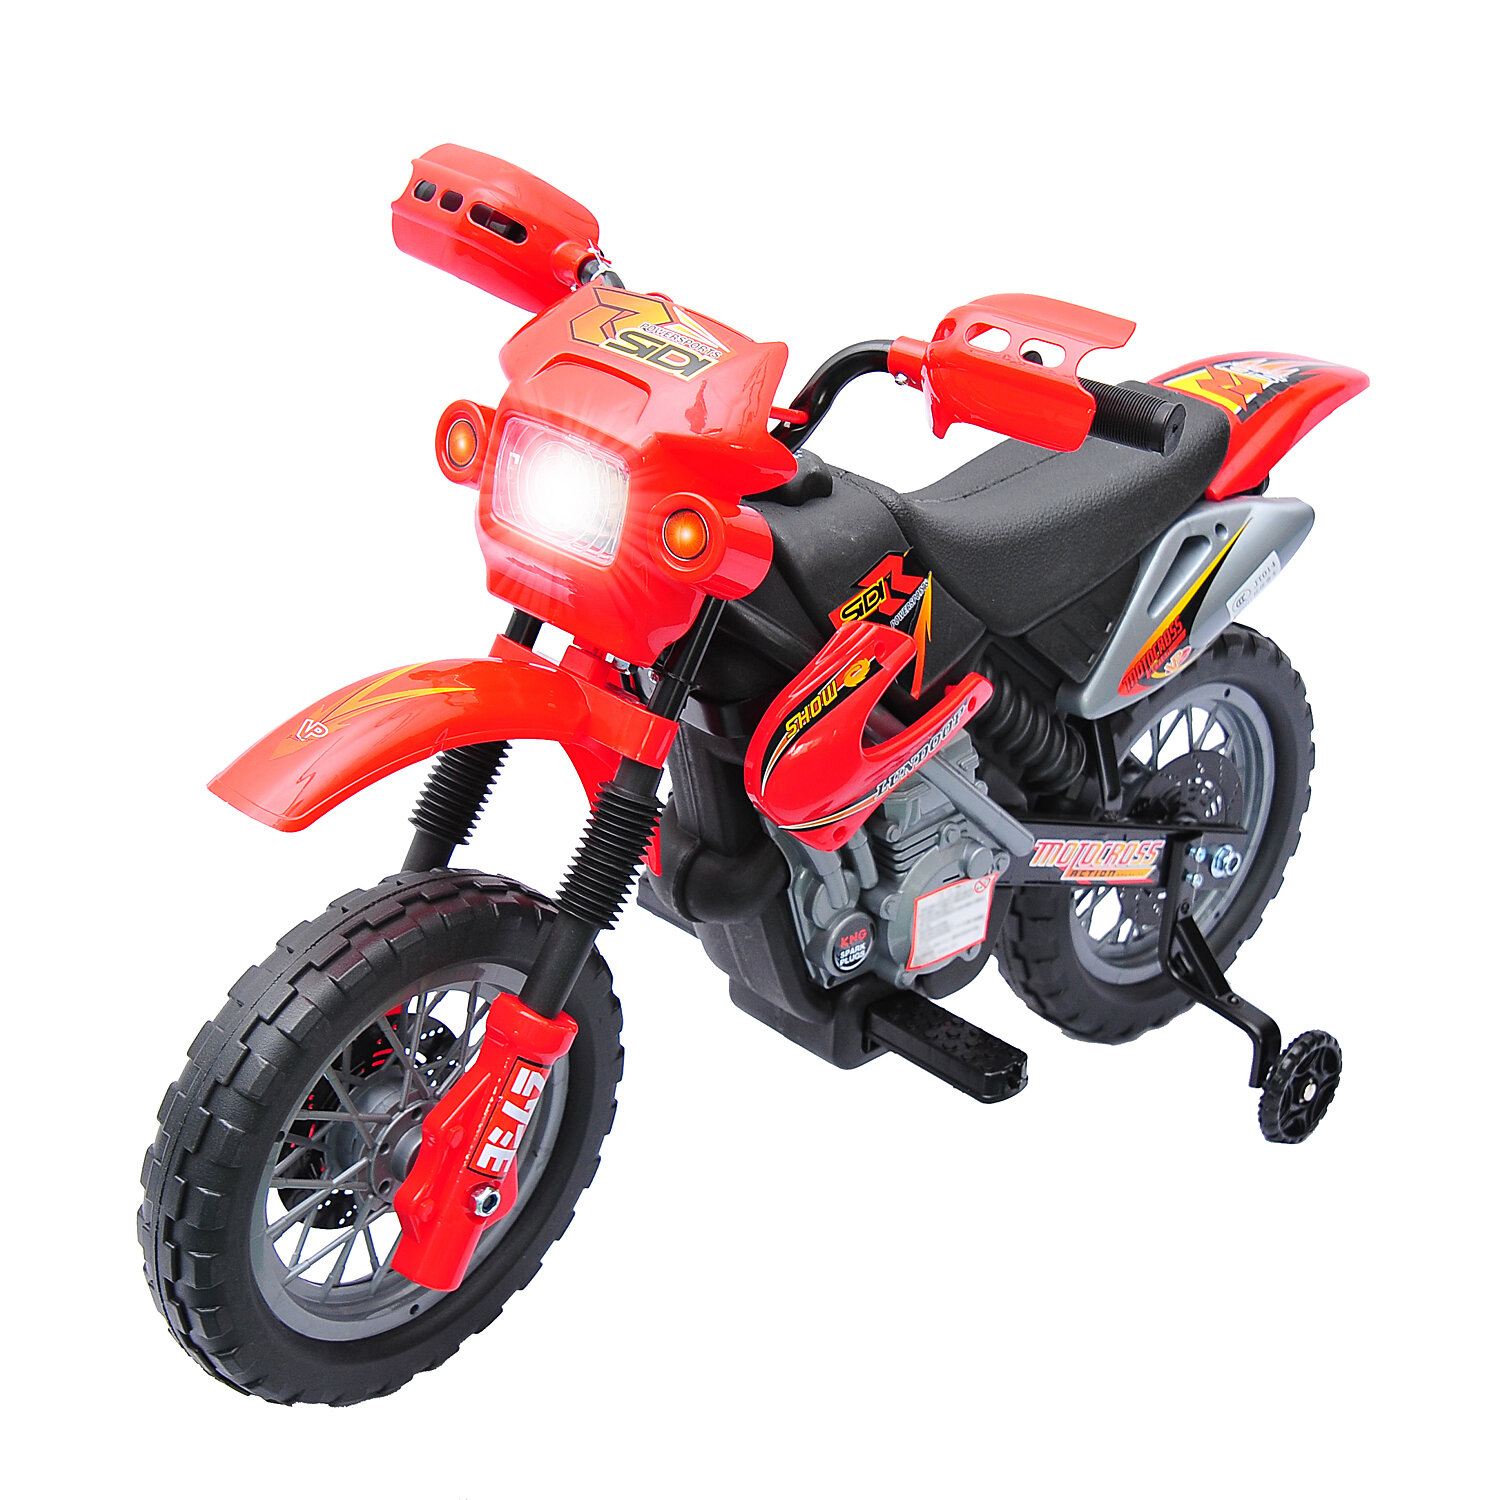 6V Kids Ride On Motorcycle Battery Powered 4 Wheel Car Bicycle Electric Toy Pink